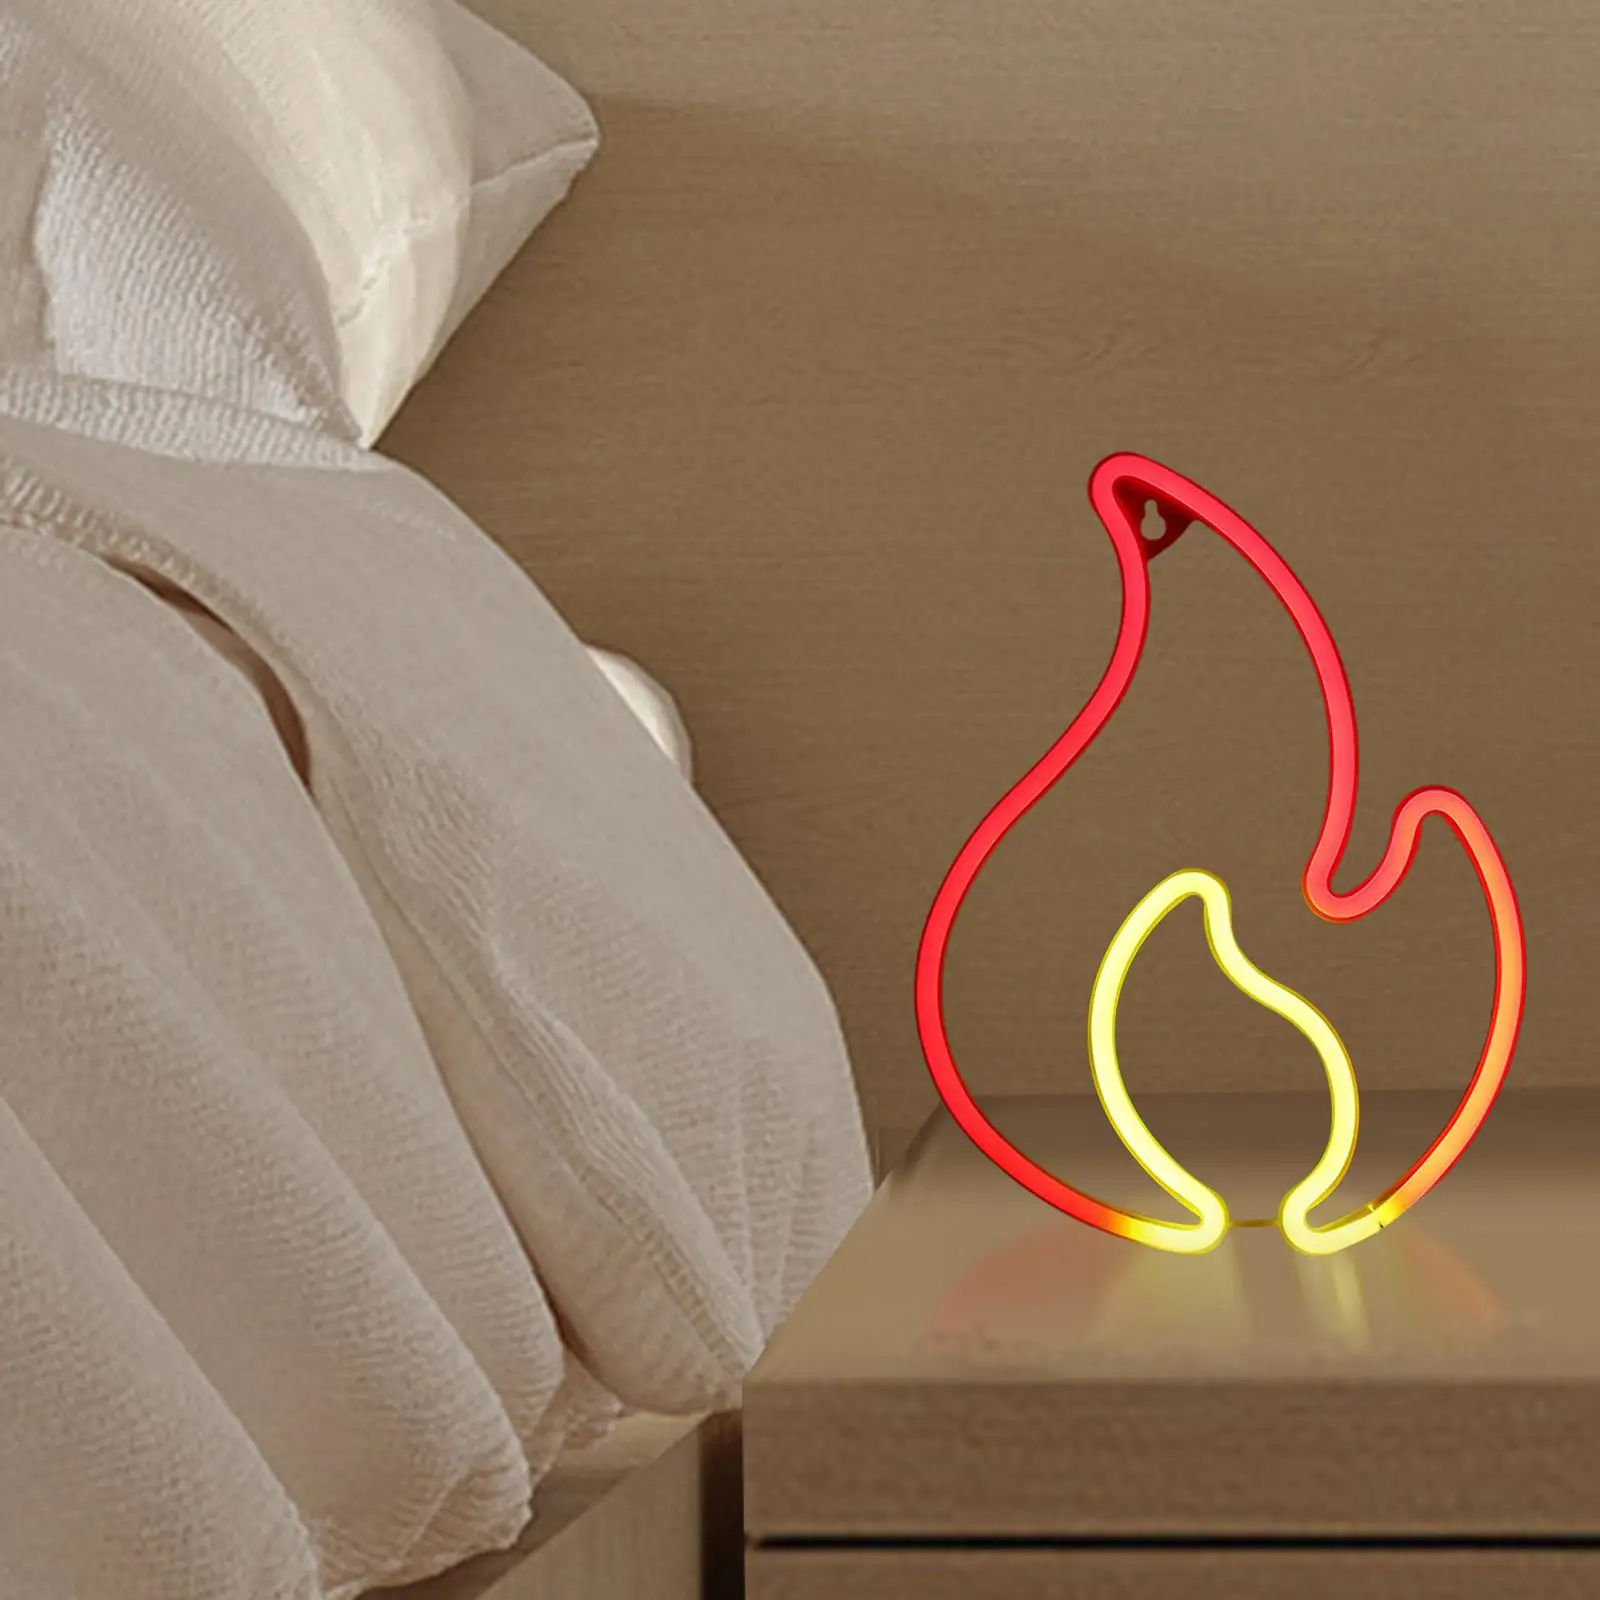 Flame Neon Sign USB Powered Hanging Flame Shaped Light Wall Decoration Light up Signs for Bar Gaming Room Kids Living Room Party